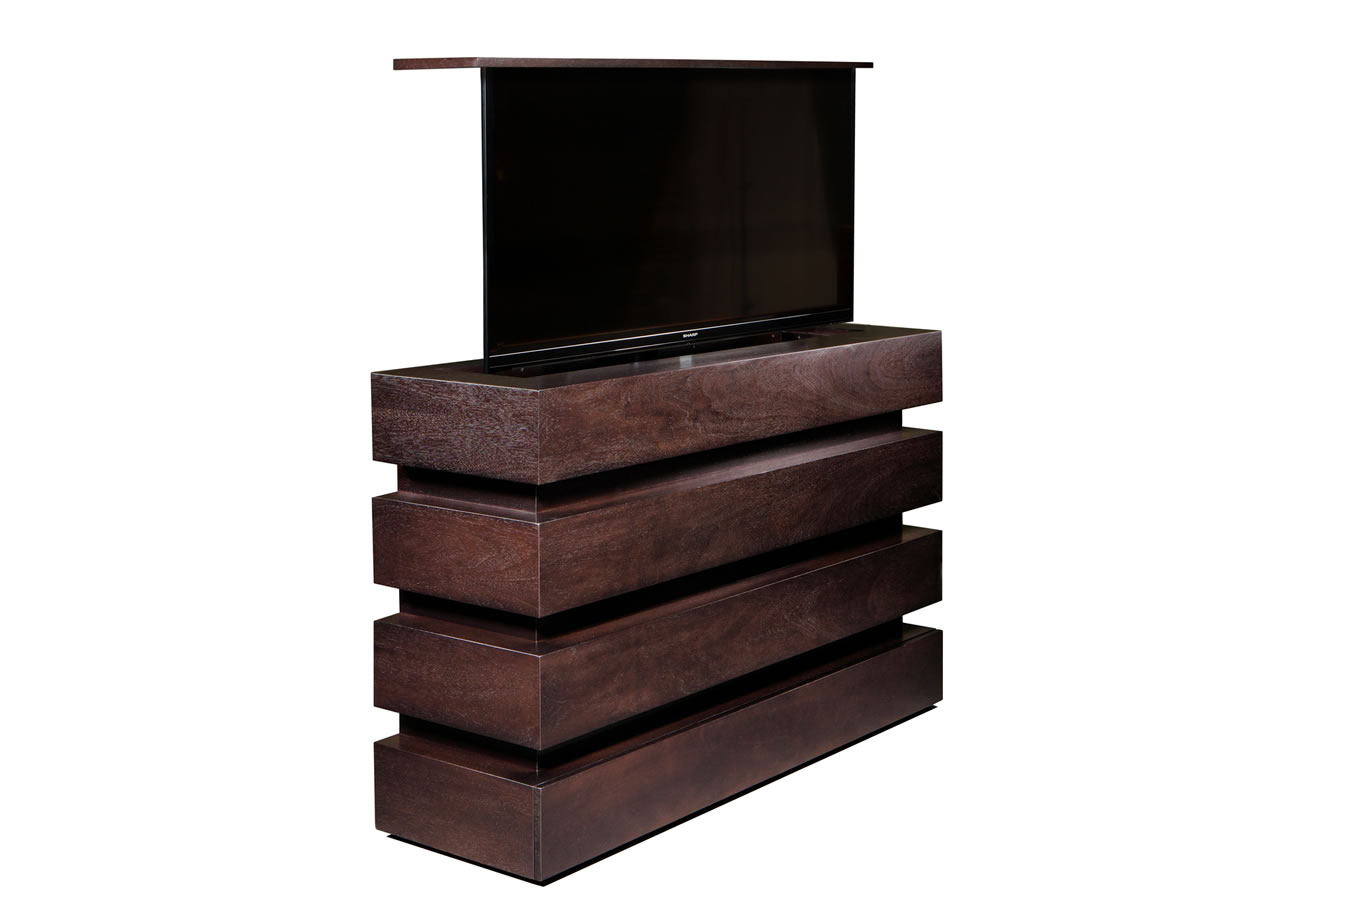 Le Bloc TV Lift Console mahogany cabinet with an espresso finish.  This piece holds up to 55 inch flat screen televisions